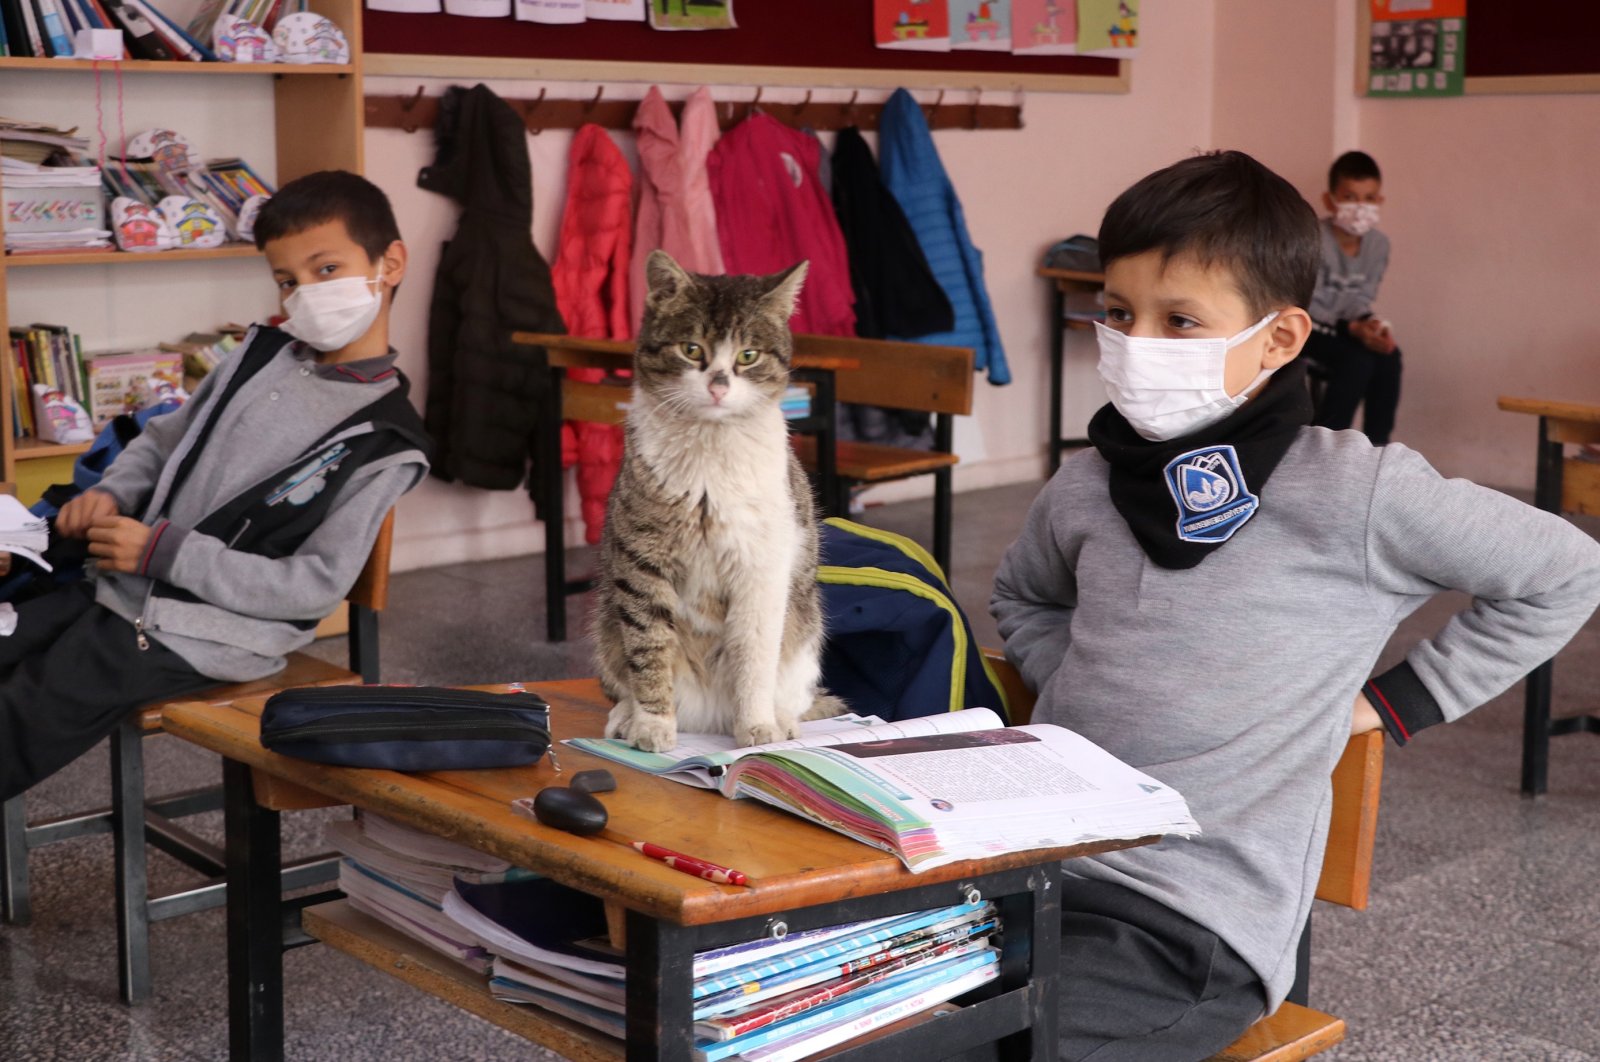 Sleepyhead the cat sits on a desk in the classroom, in Manisa, western Turkey, March 30, 2022. (AA PHOTO)